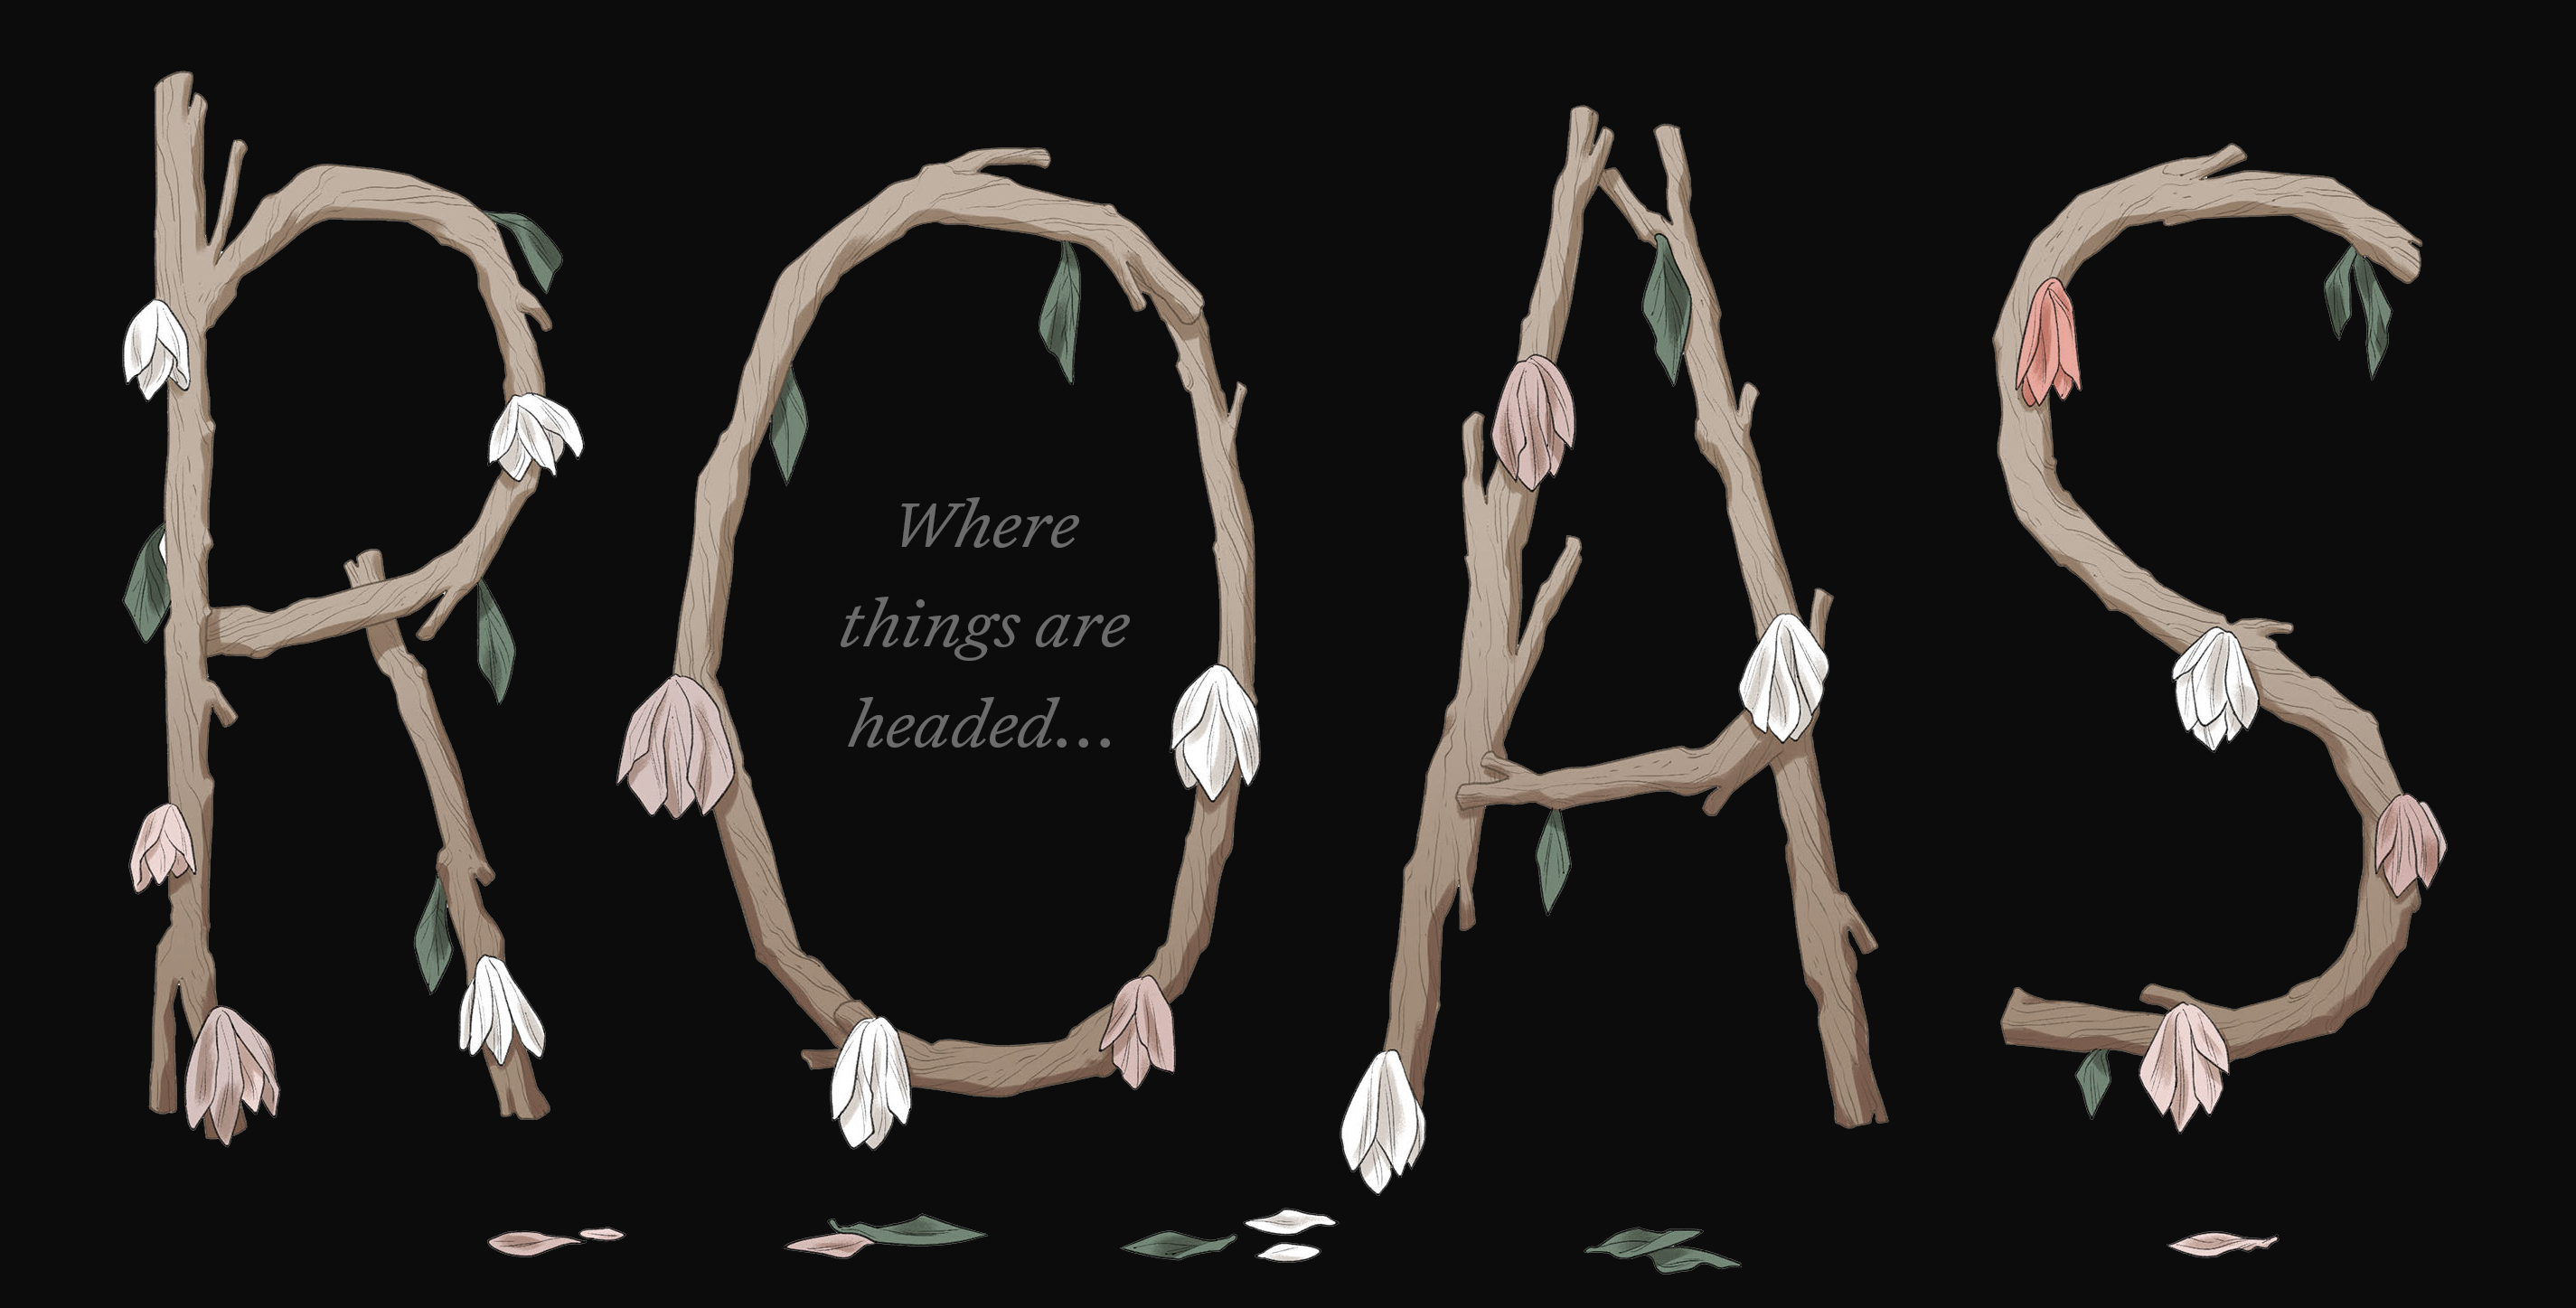 Illustration of barren branches and wilting flowers forming the word "ROAS", with a subtext "Where things are headed..."